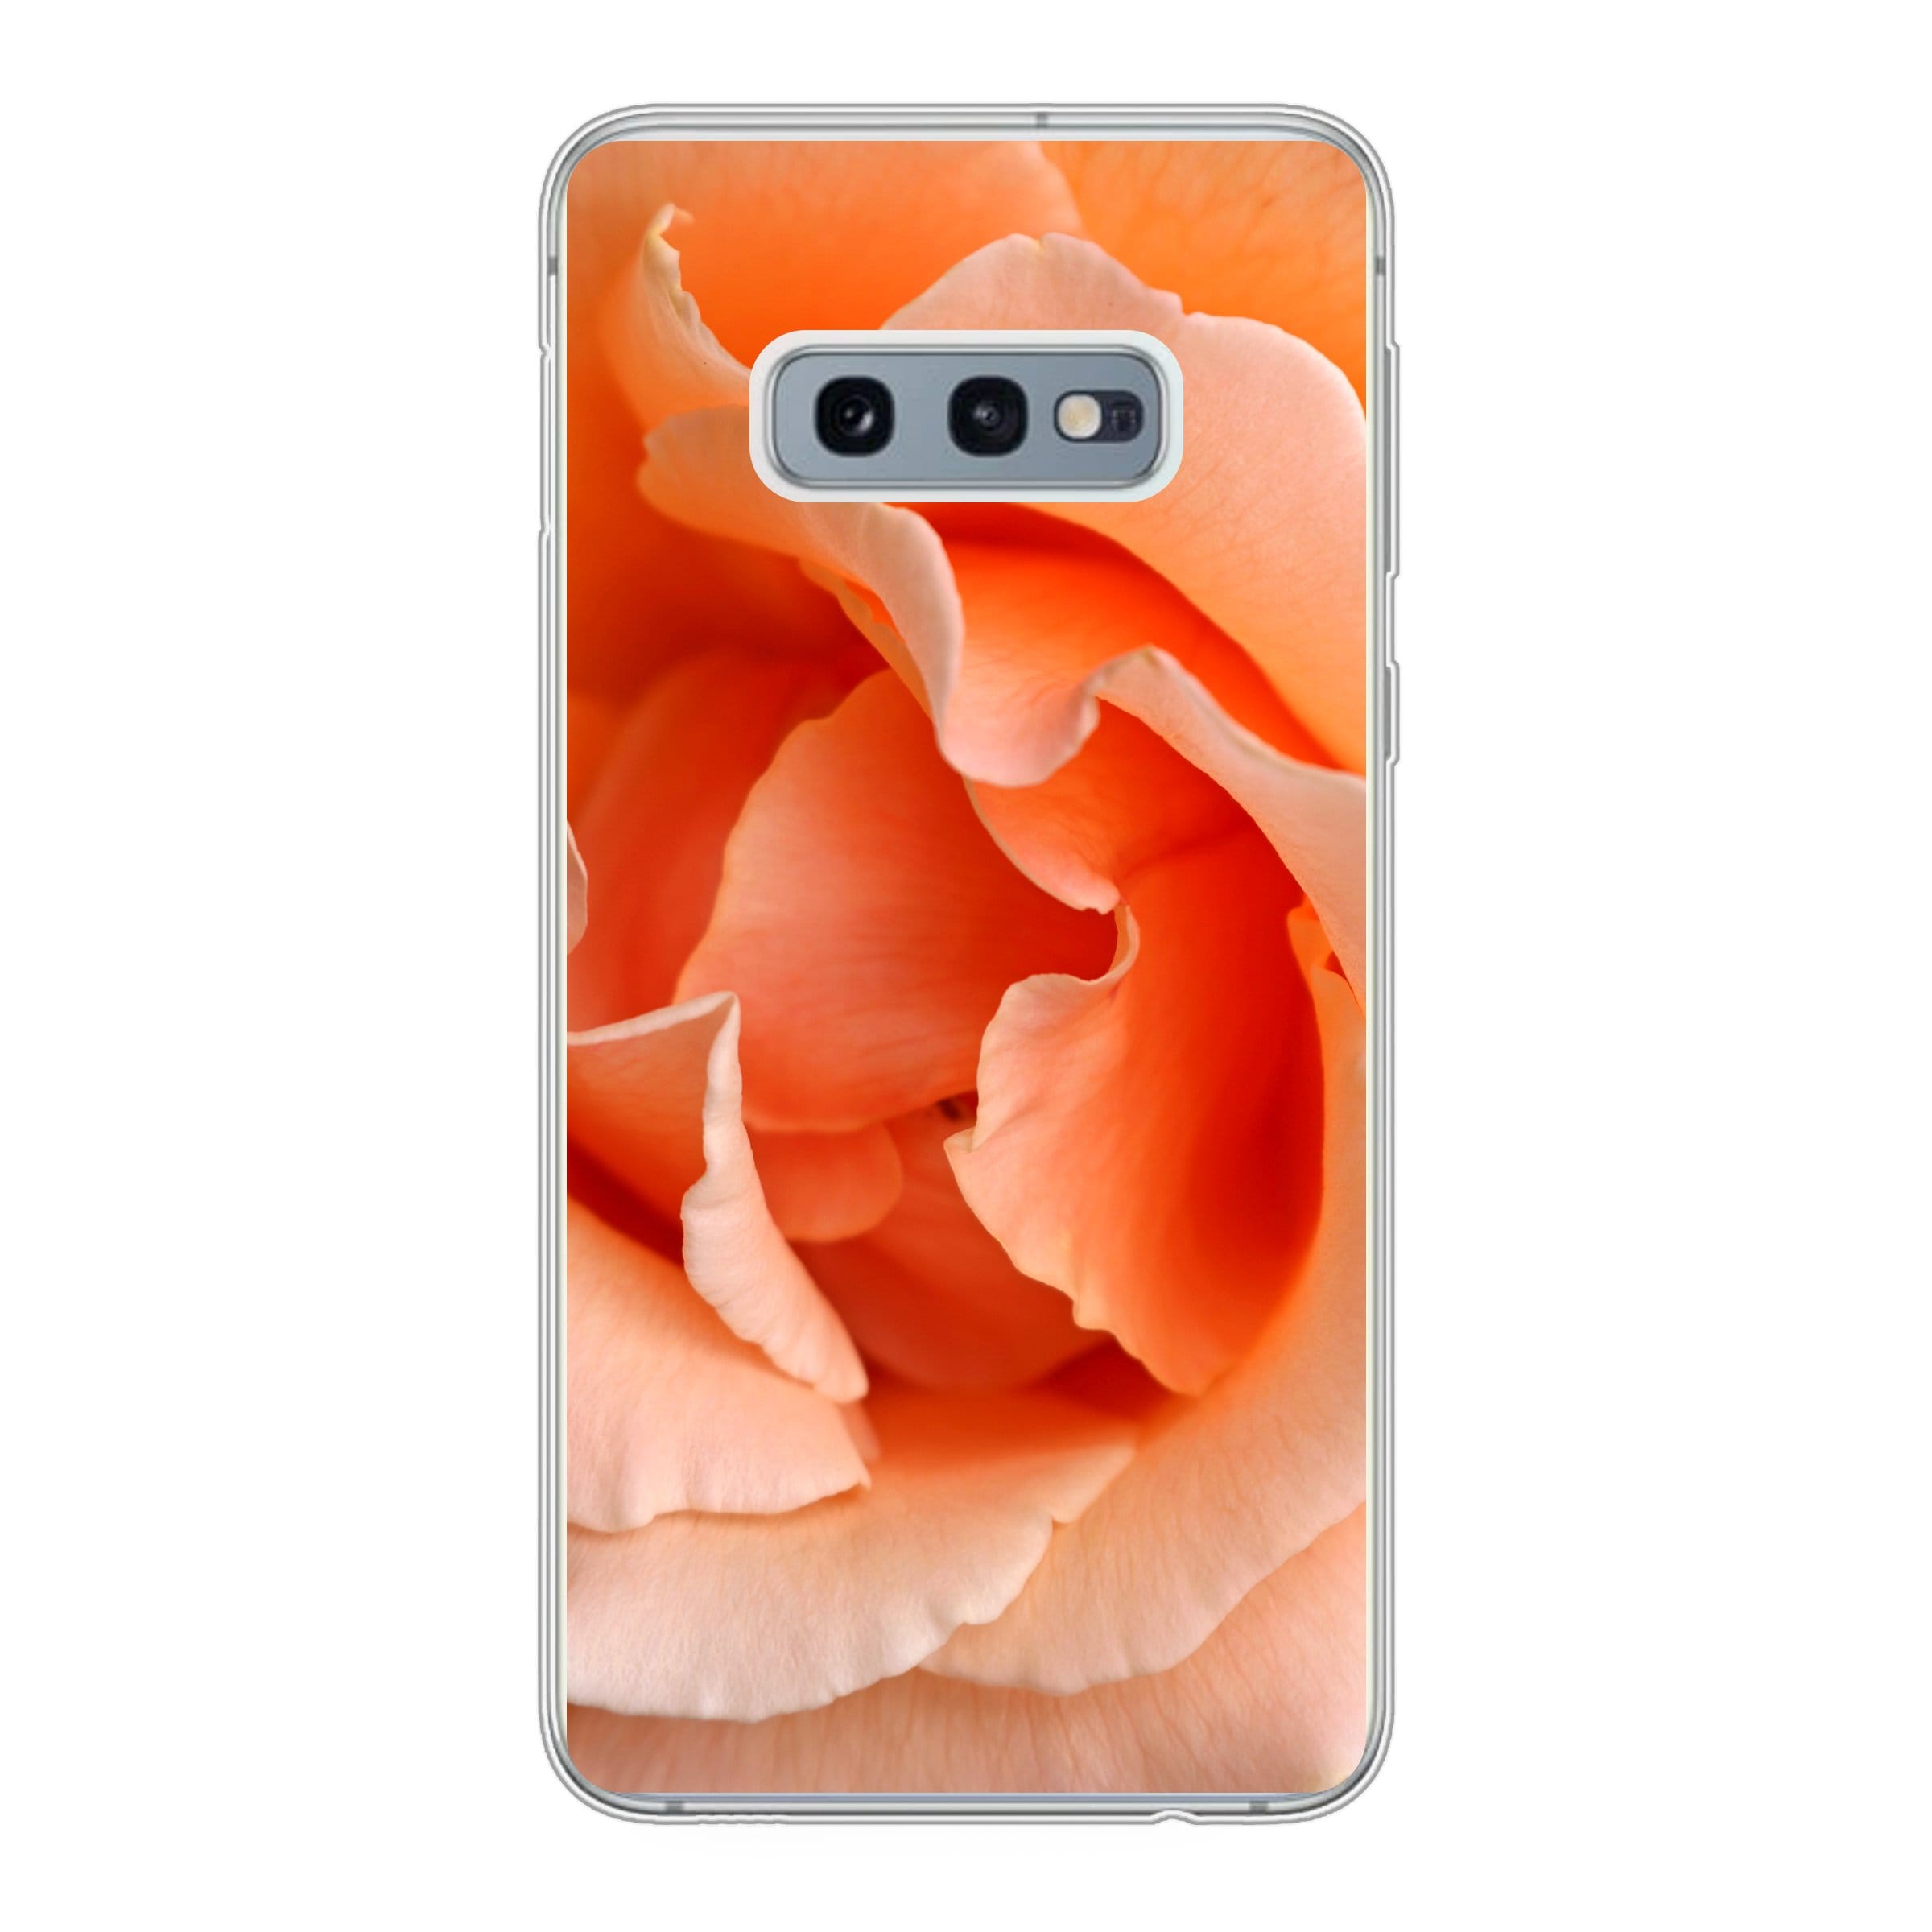 Personalised Samsung Galaxy S10e Soft Phone Case